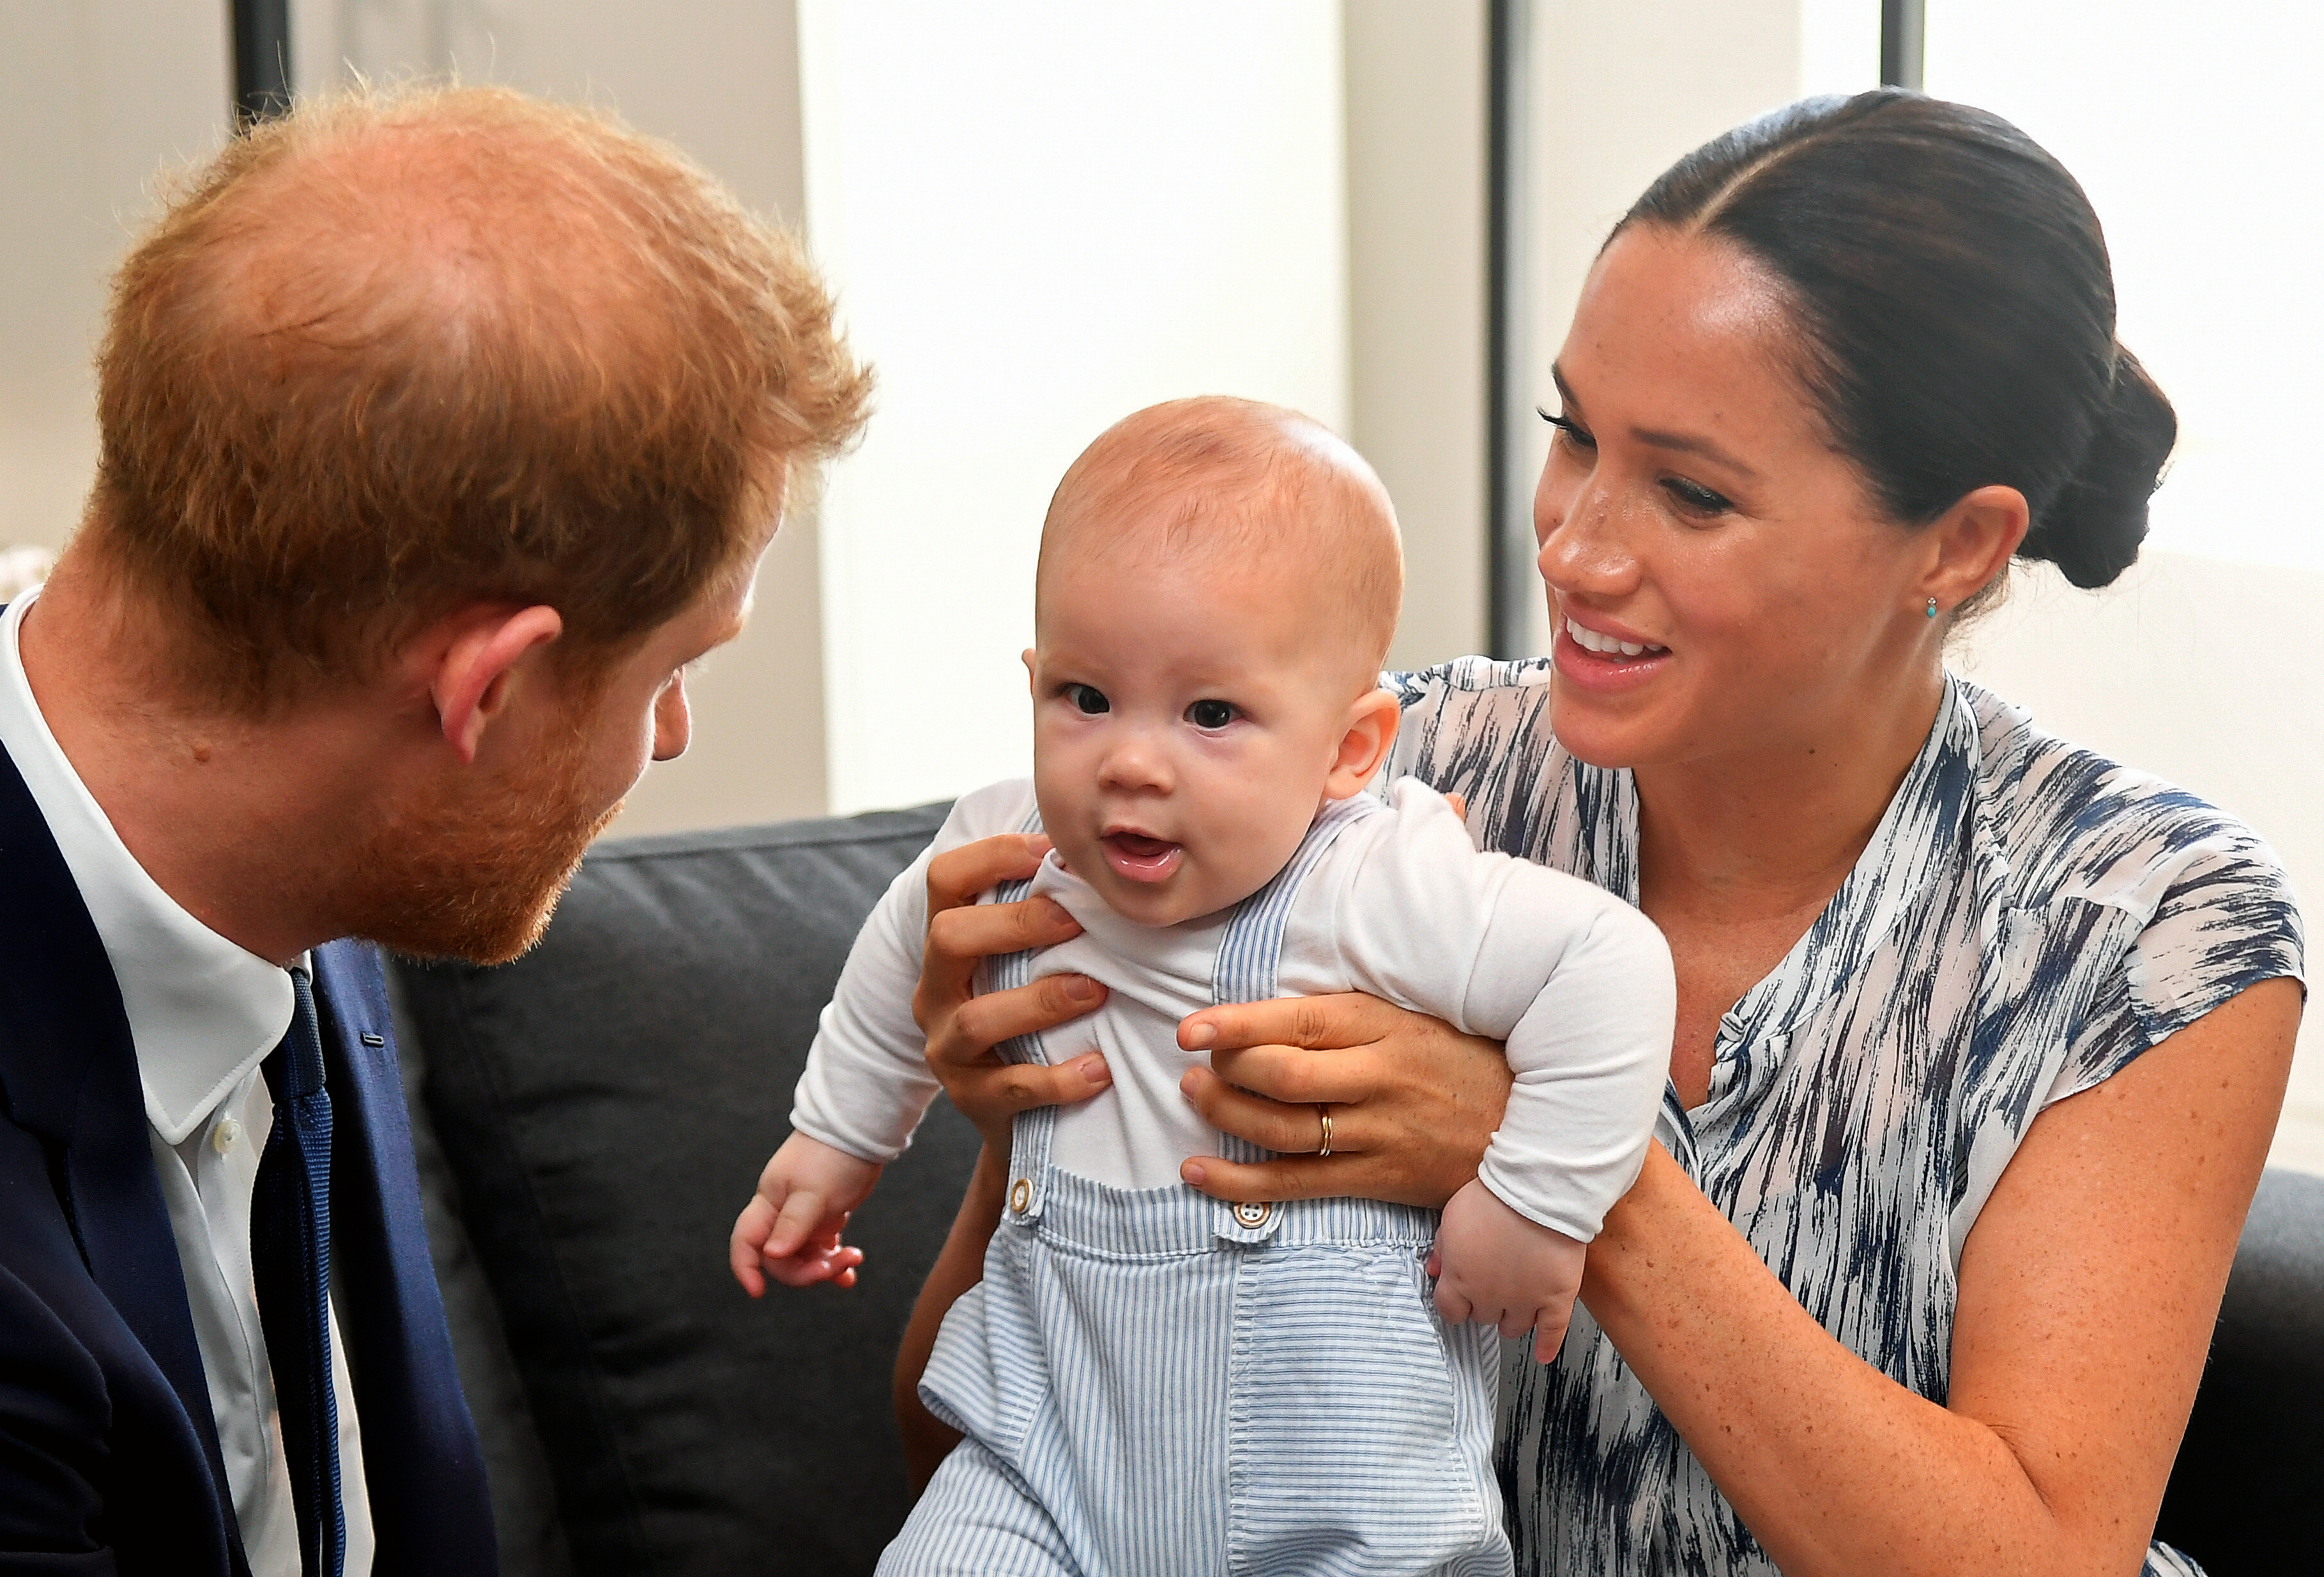 Prince Harry, Duke of Sussex and Meghan, Duchess of Sussex tend to their baby son Archie Mountbatten-Windsor at a meeting with Archbishop Desmond Tutu on September 25, 2019 in Cape Town, South Africa. (Toby Melville—Getty Images)